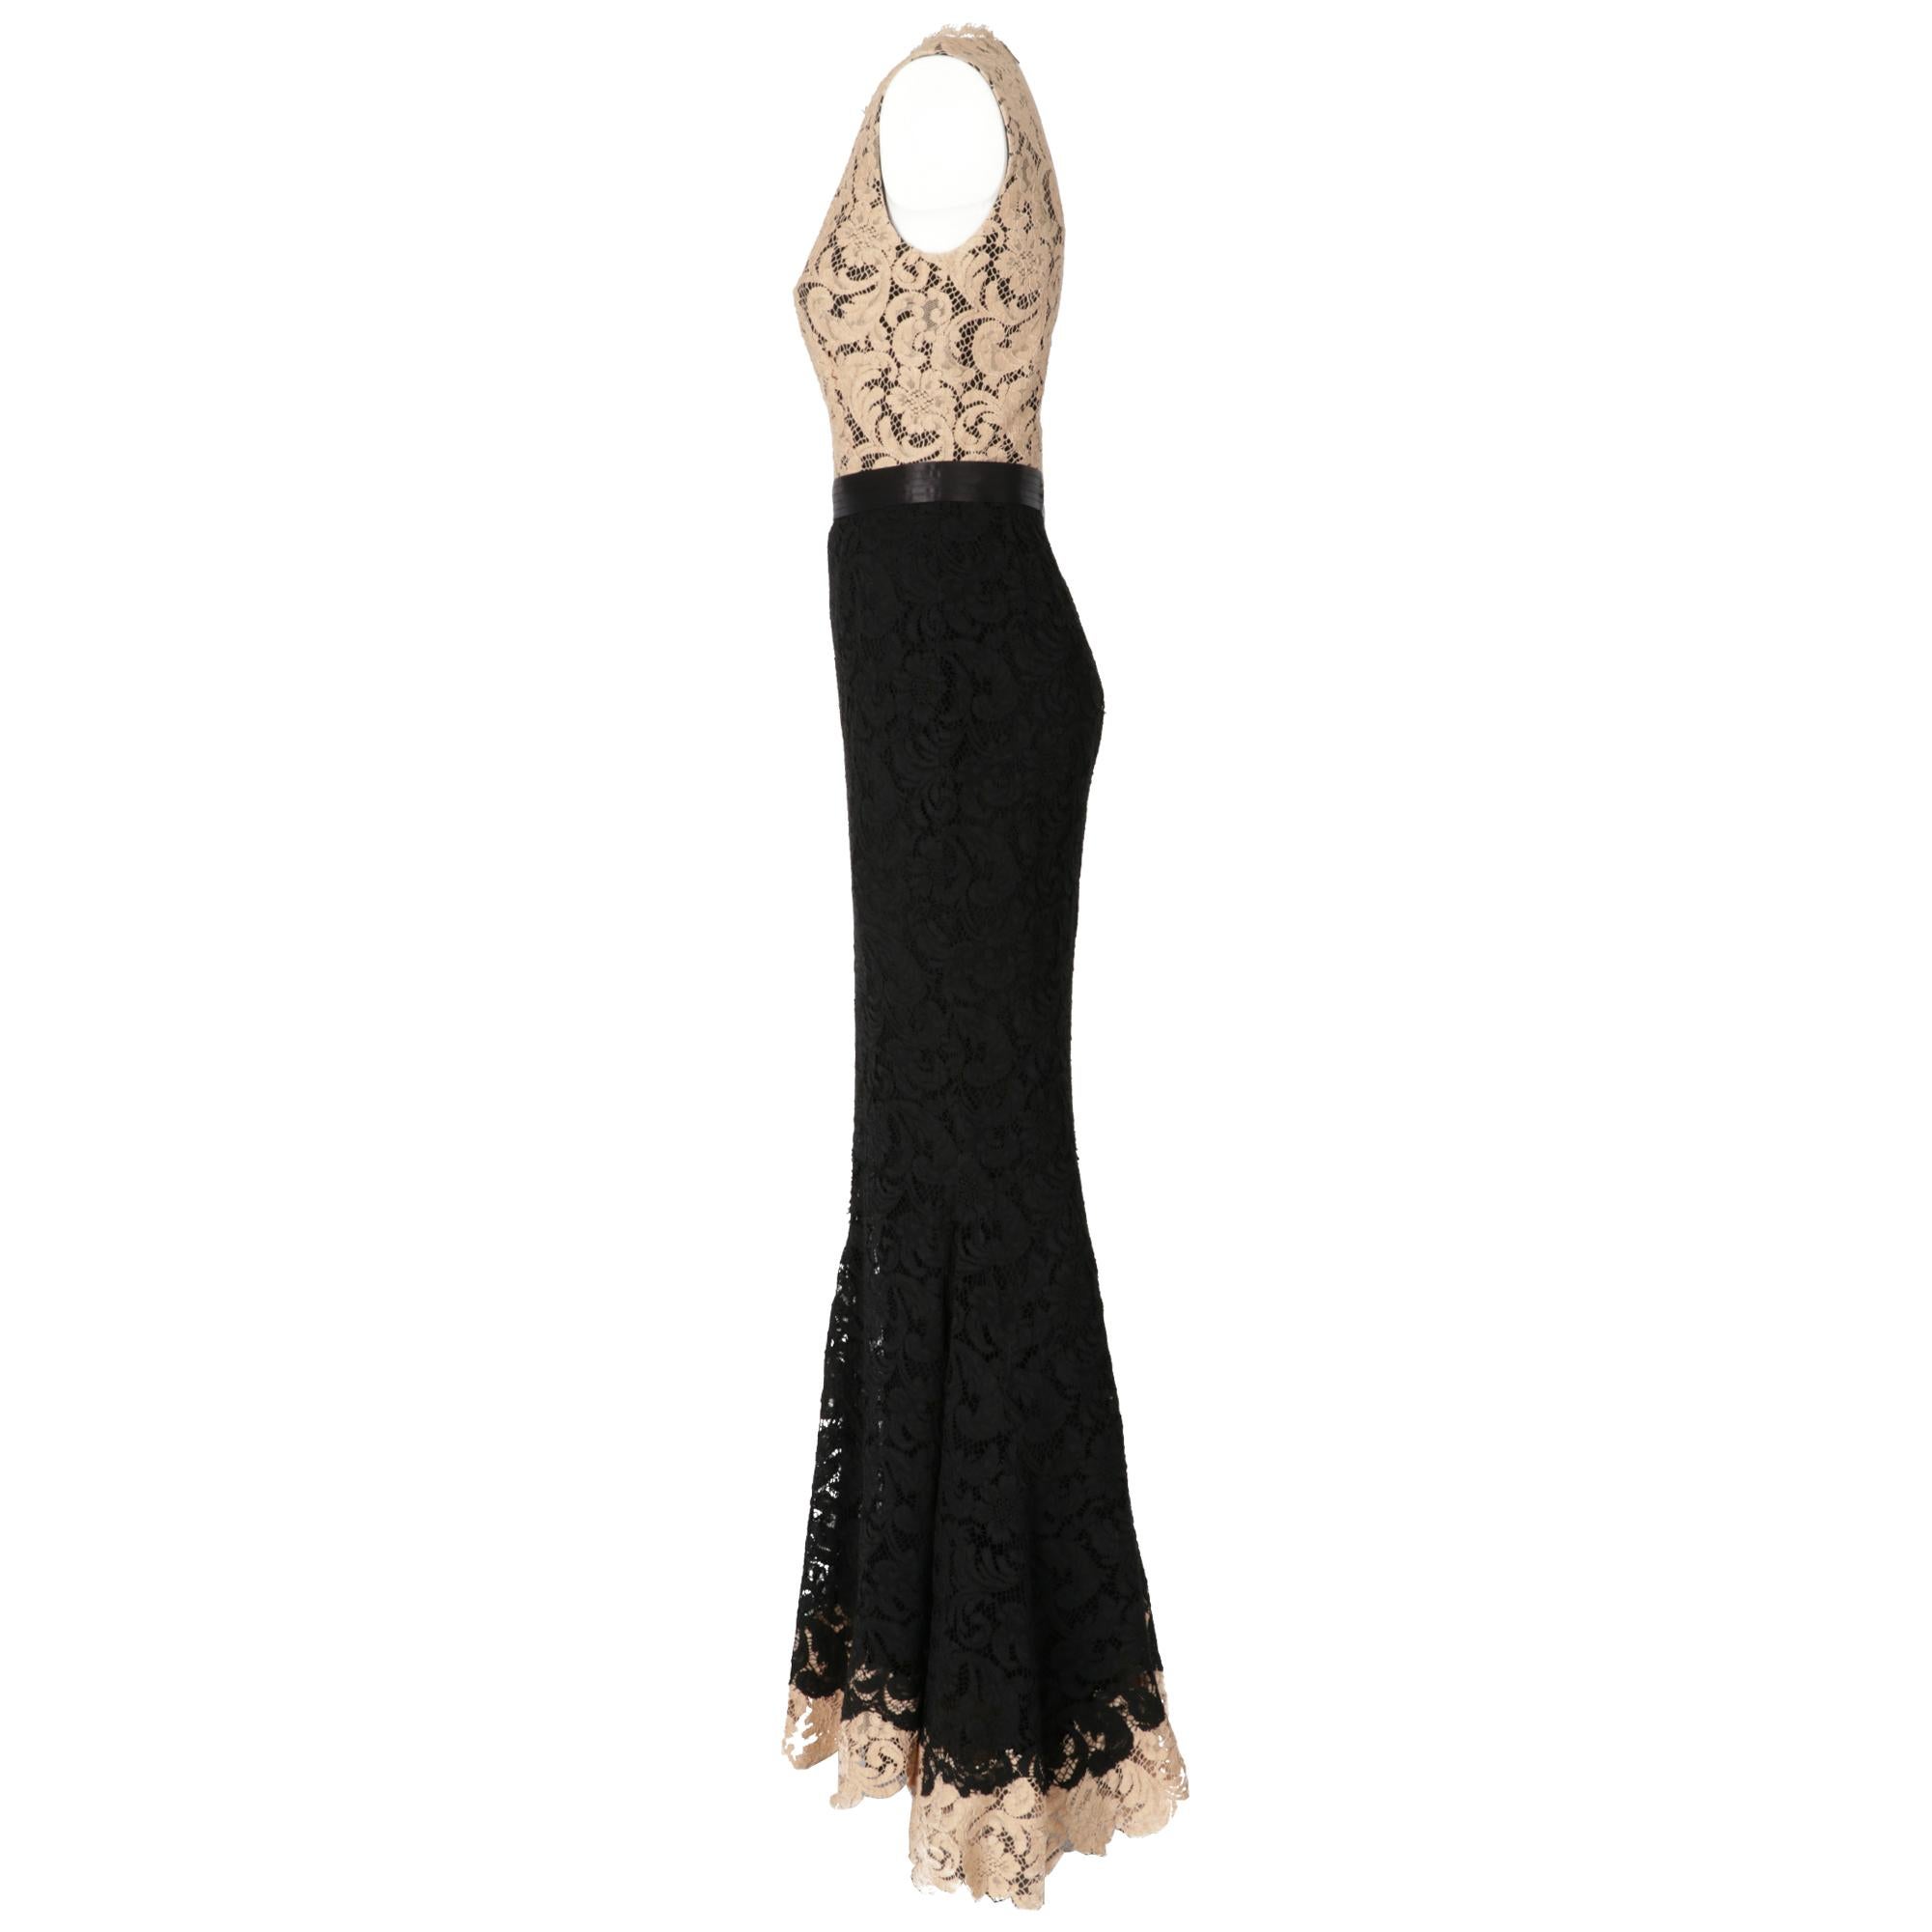 Zuhair Murad mermaid sleeveless dress with beige lace bust and bottom band, black lace skirt, black satin waist band, silk lining and tulle flounce in the bottom skirt.
Years: 2000s

Made in Italy

Size: 38 IT

Linear measures

Height: 162 cm 
Bust: